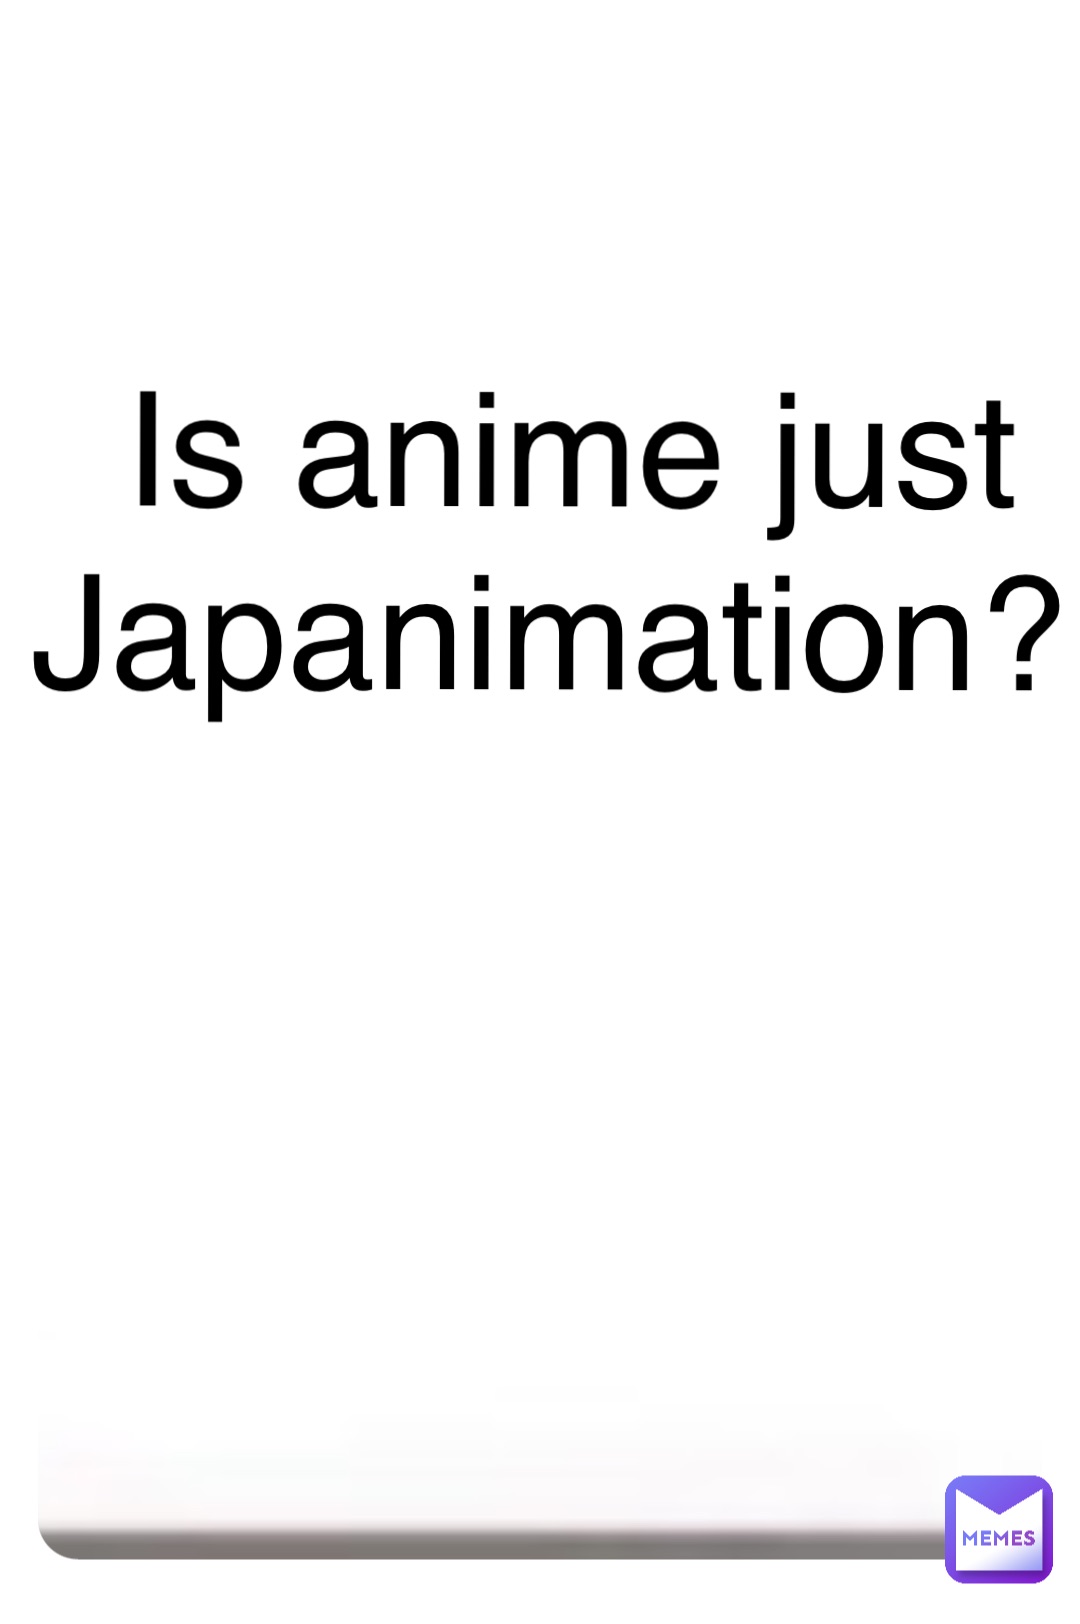 Double tap to edit Is anime just Japanimation?